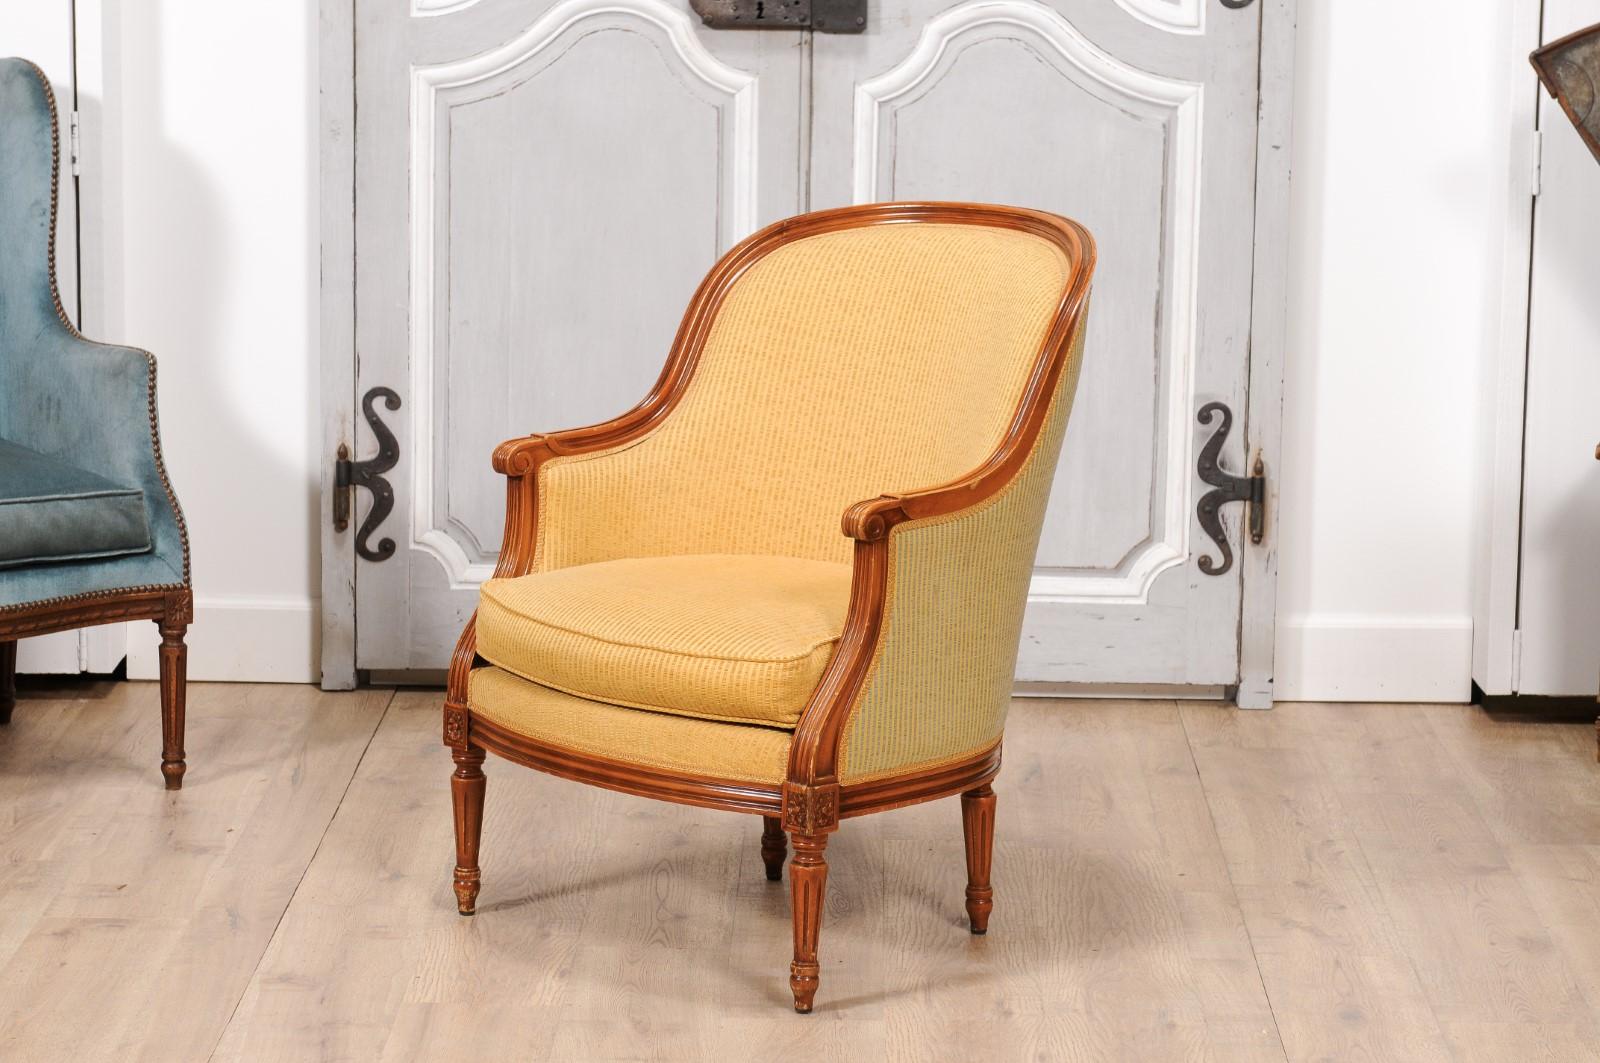 French Louis XVI Style Walnut Bergères Chairs with Wraparound Backs, Pair For Sale 3